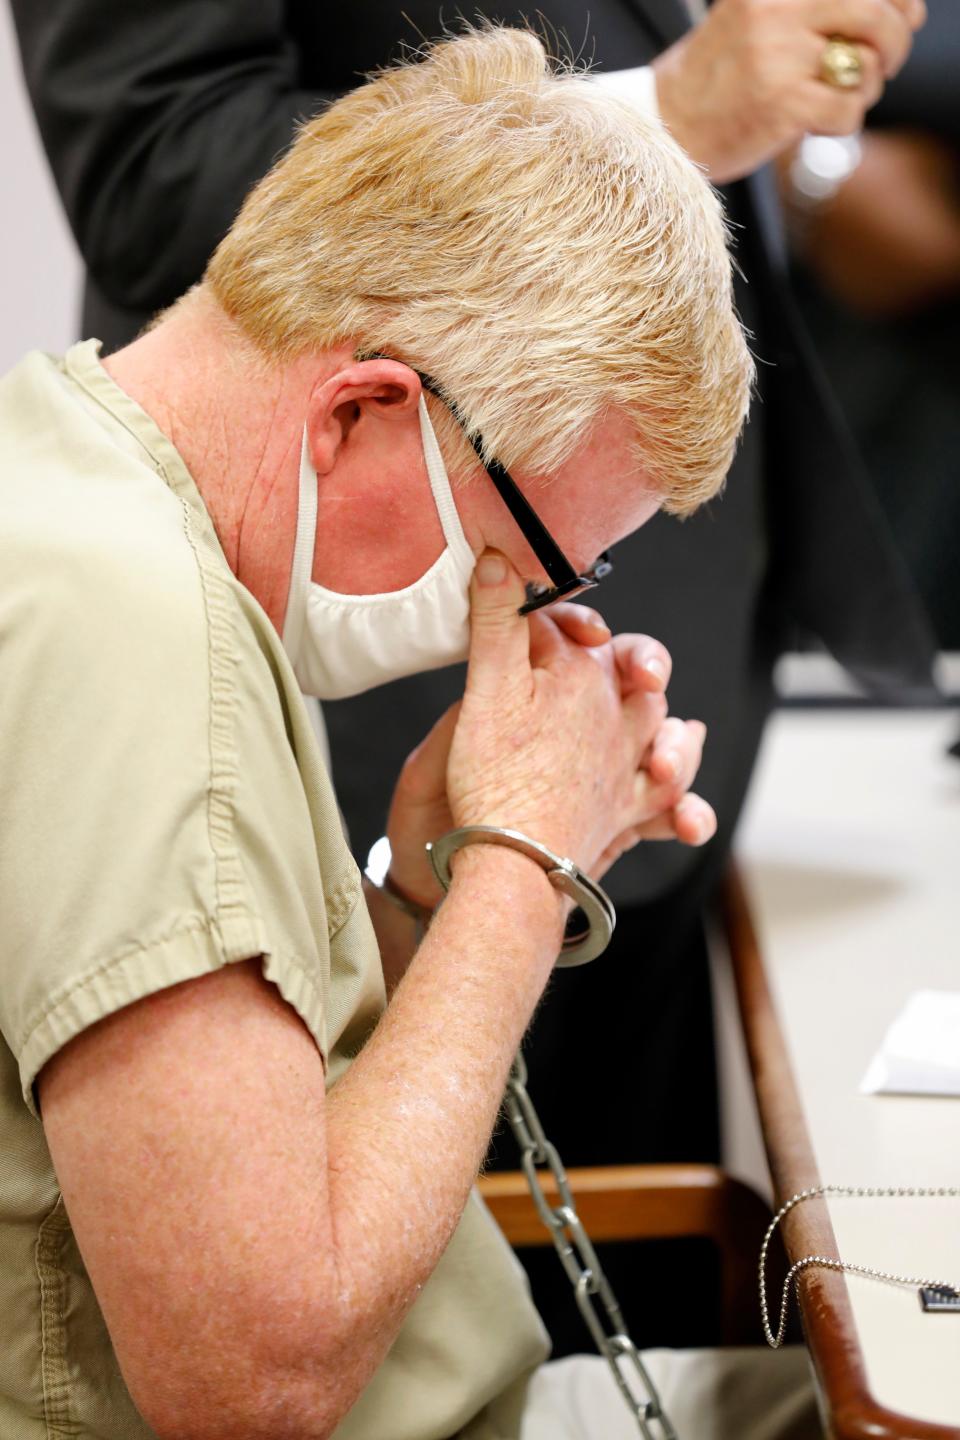 Alex Murdaugh weeps during his bond hearing, Thursday, Sept. 16, 2021, in Varnville, S.C.